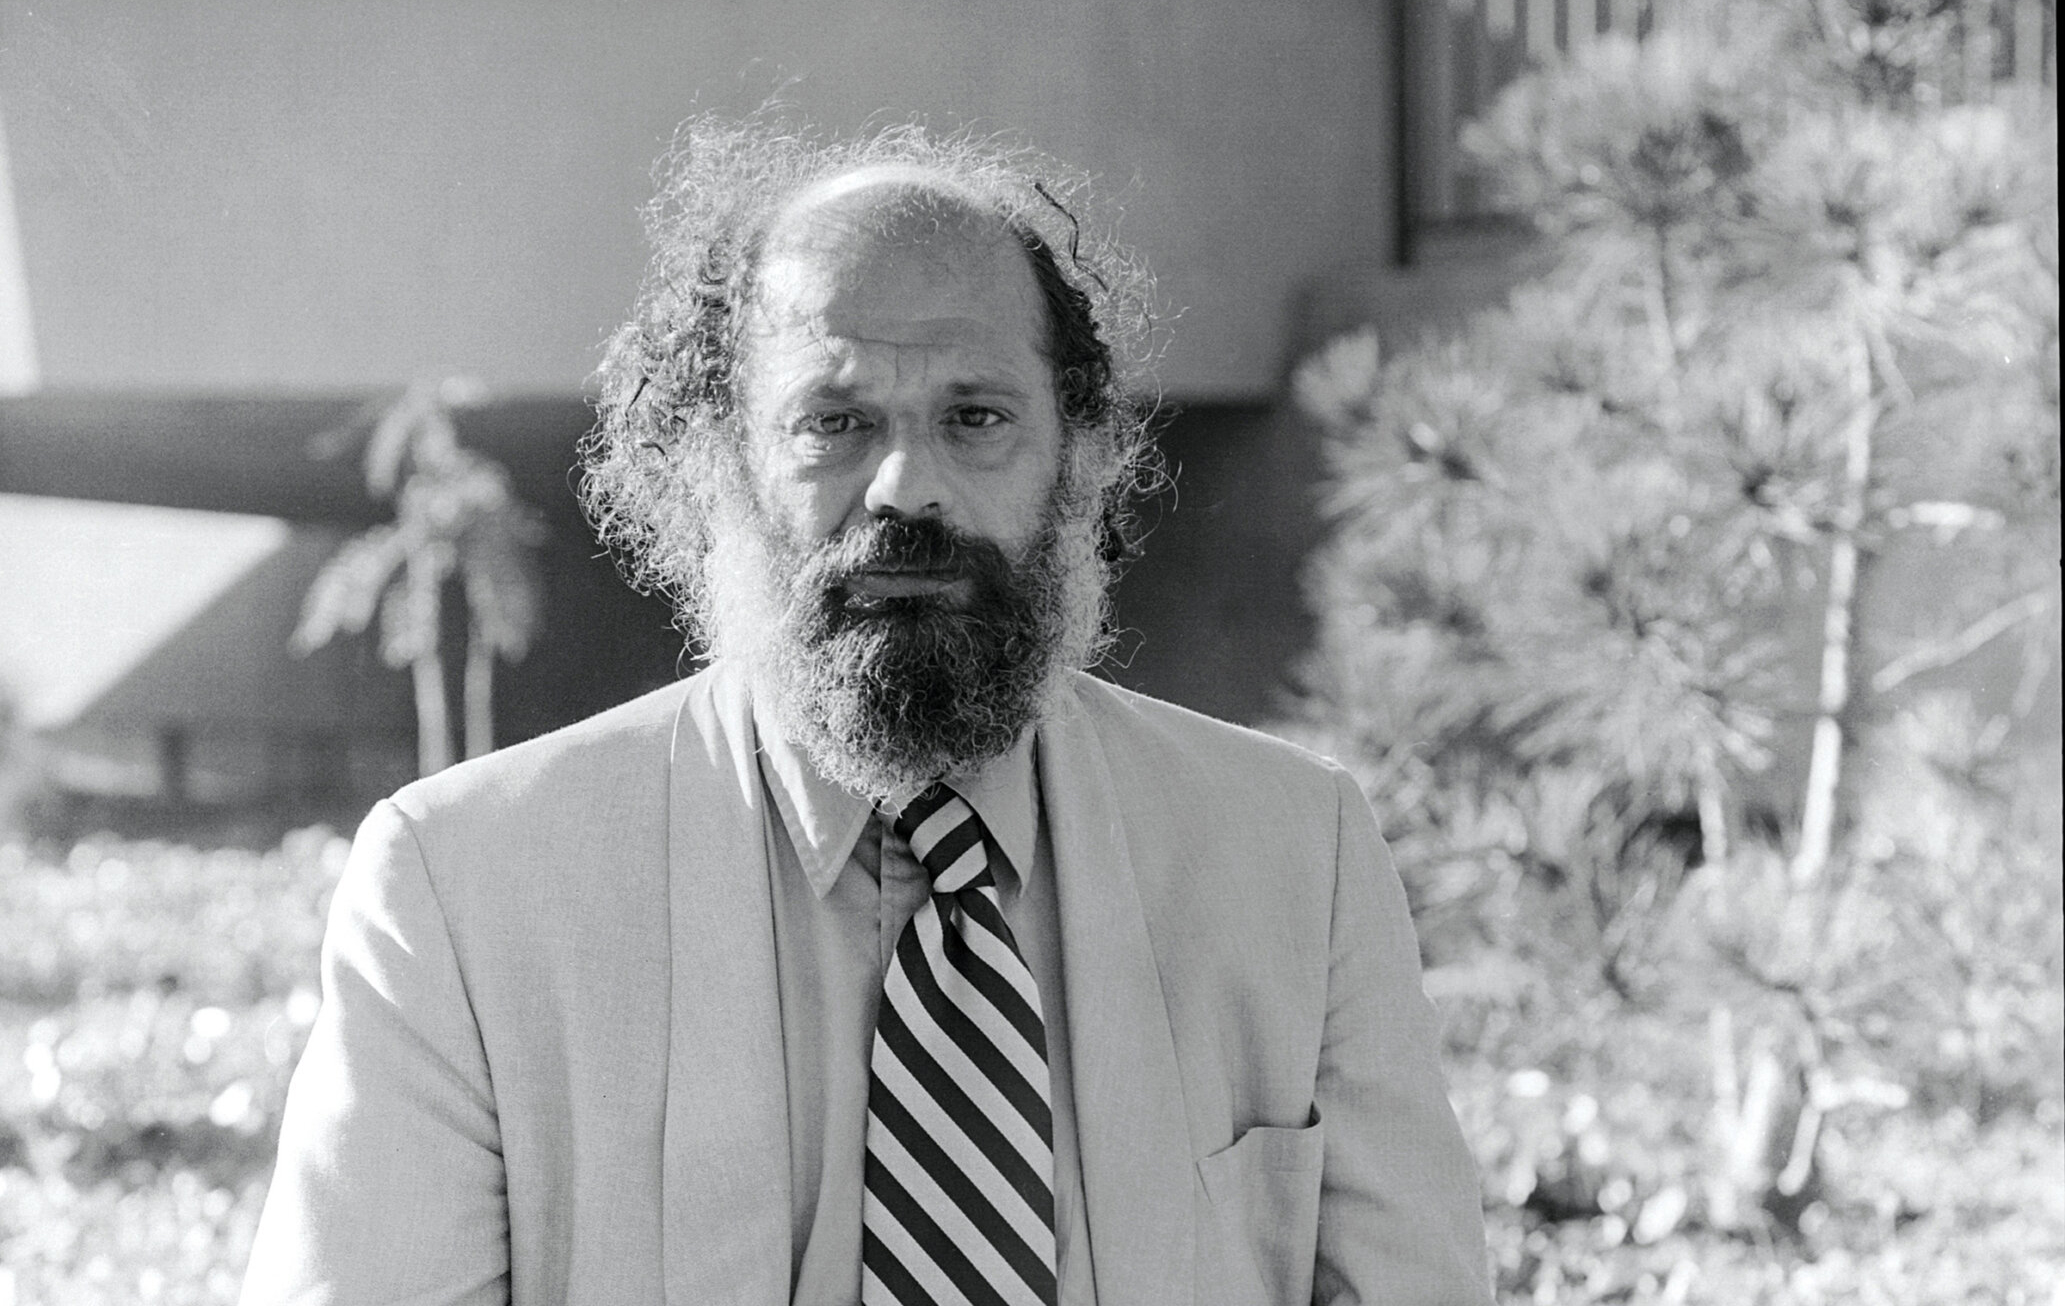 Allen Ginsberg on the grounds of the San Francisco Poetry Center, 1979, Photo: ©Joey Tranchina (cropped)